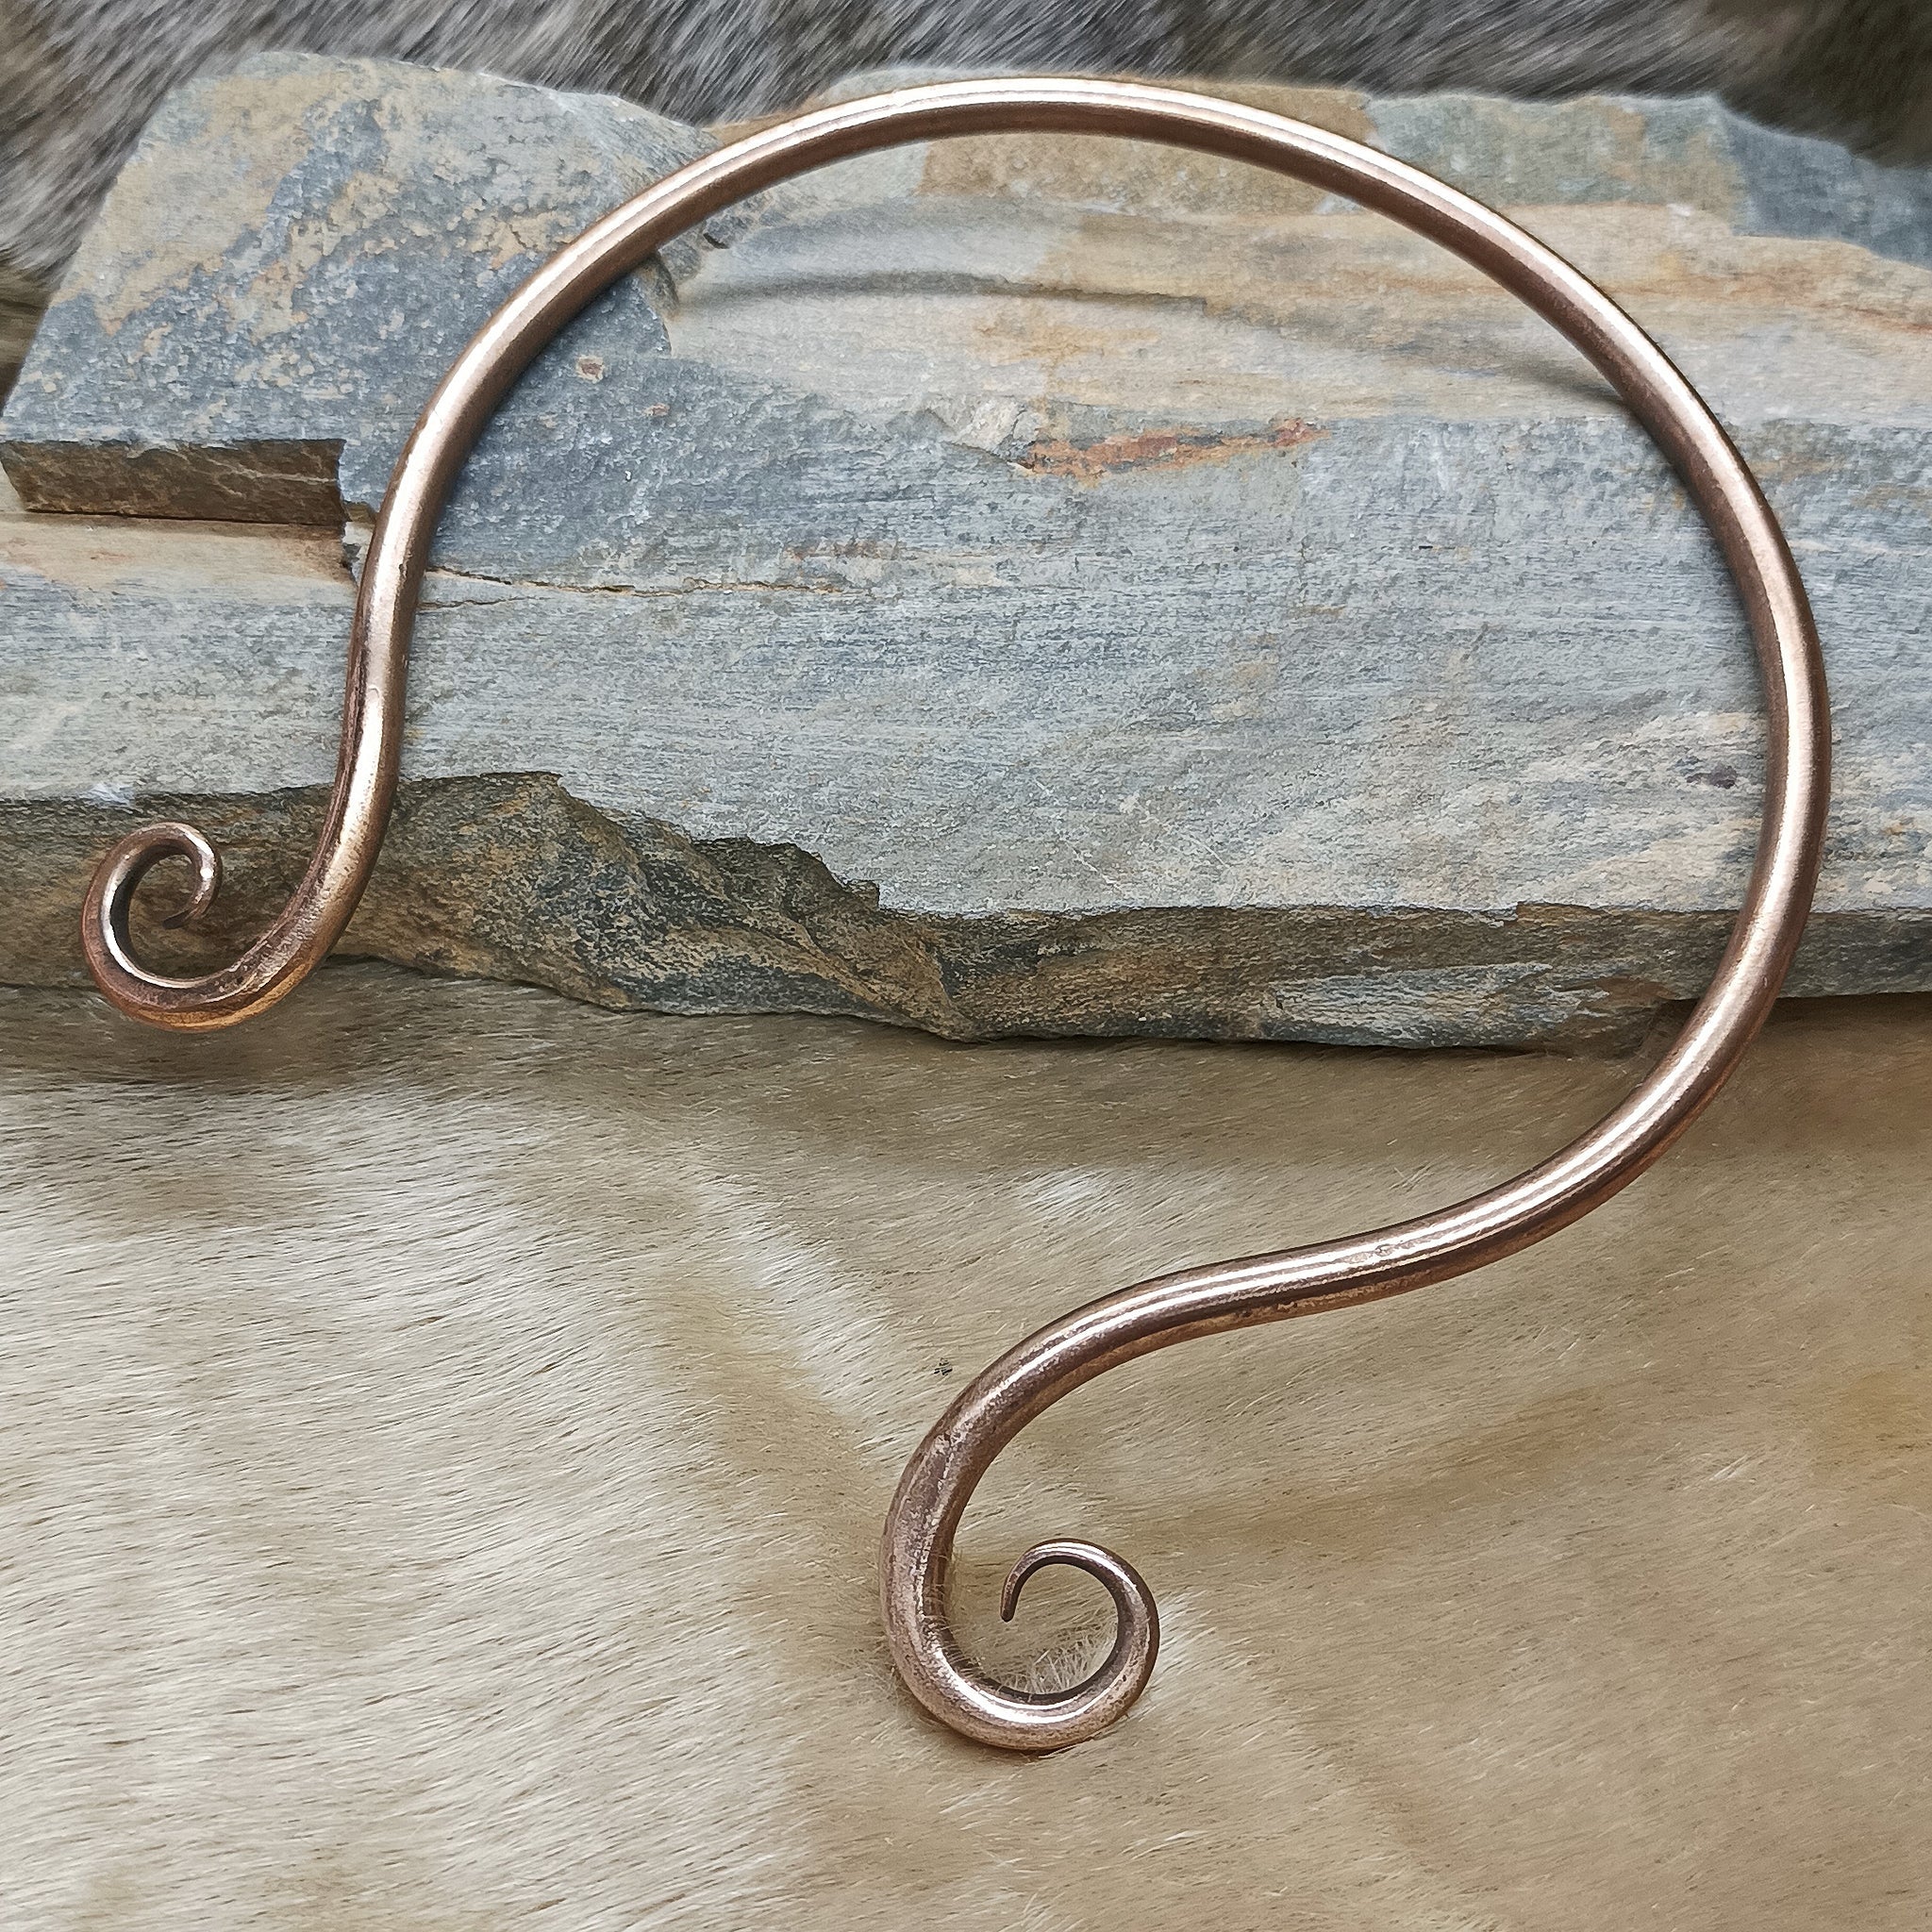 Hand-Forged Replica Viking Neck Torc in Solid Bronze - Medium